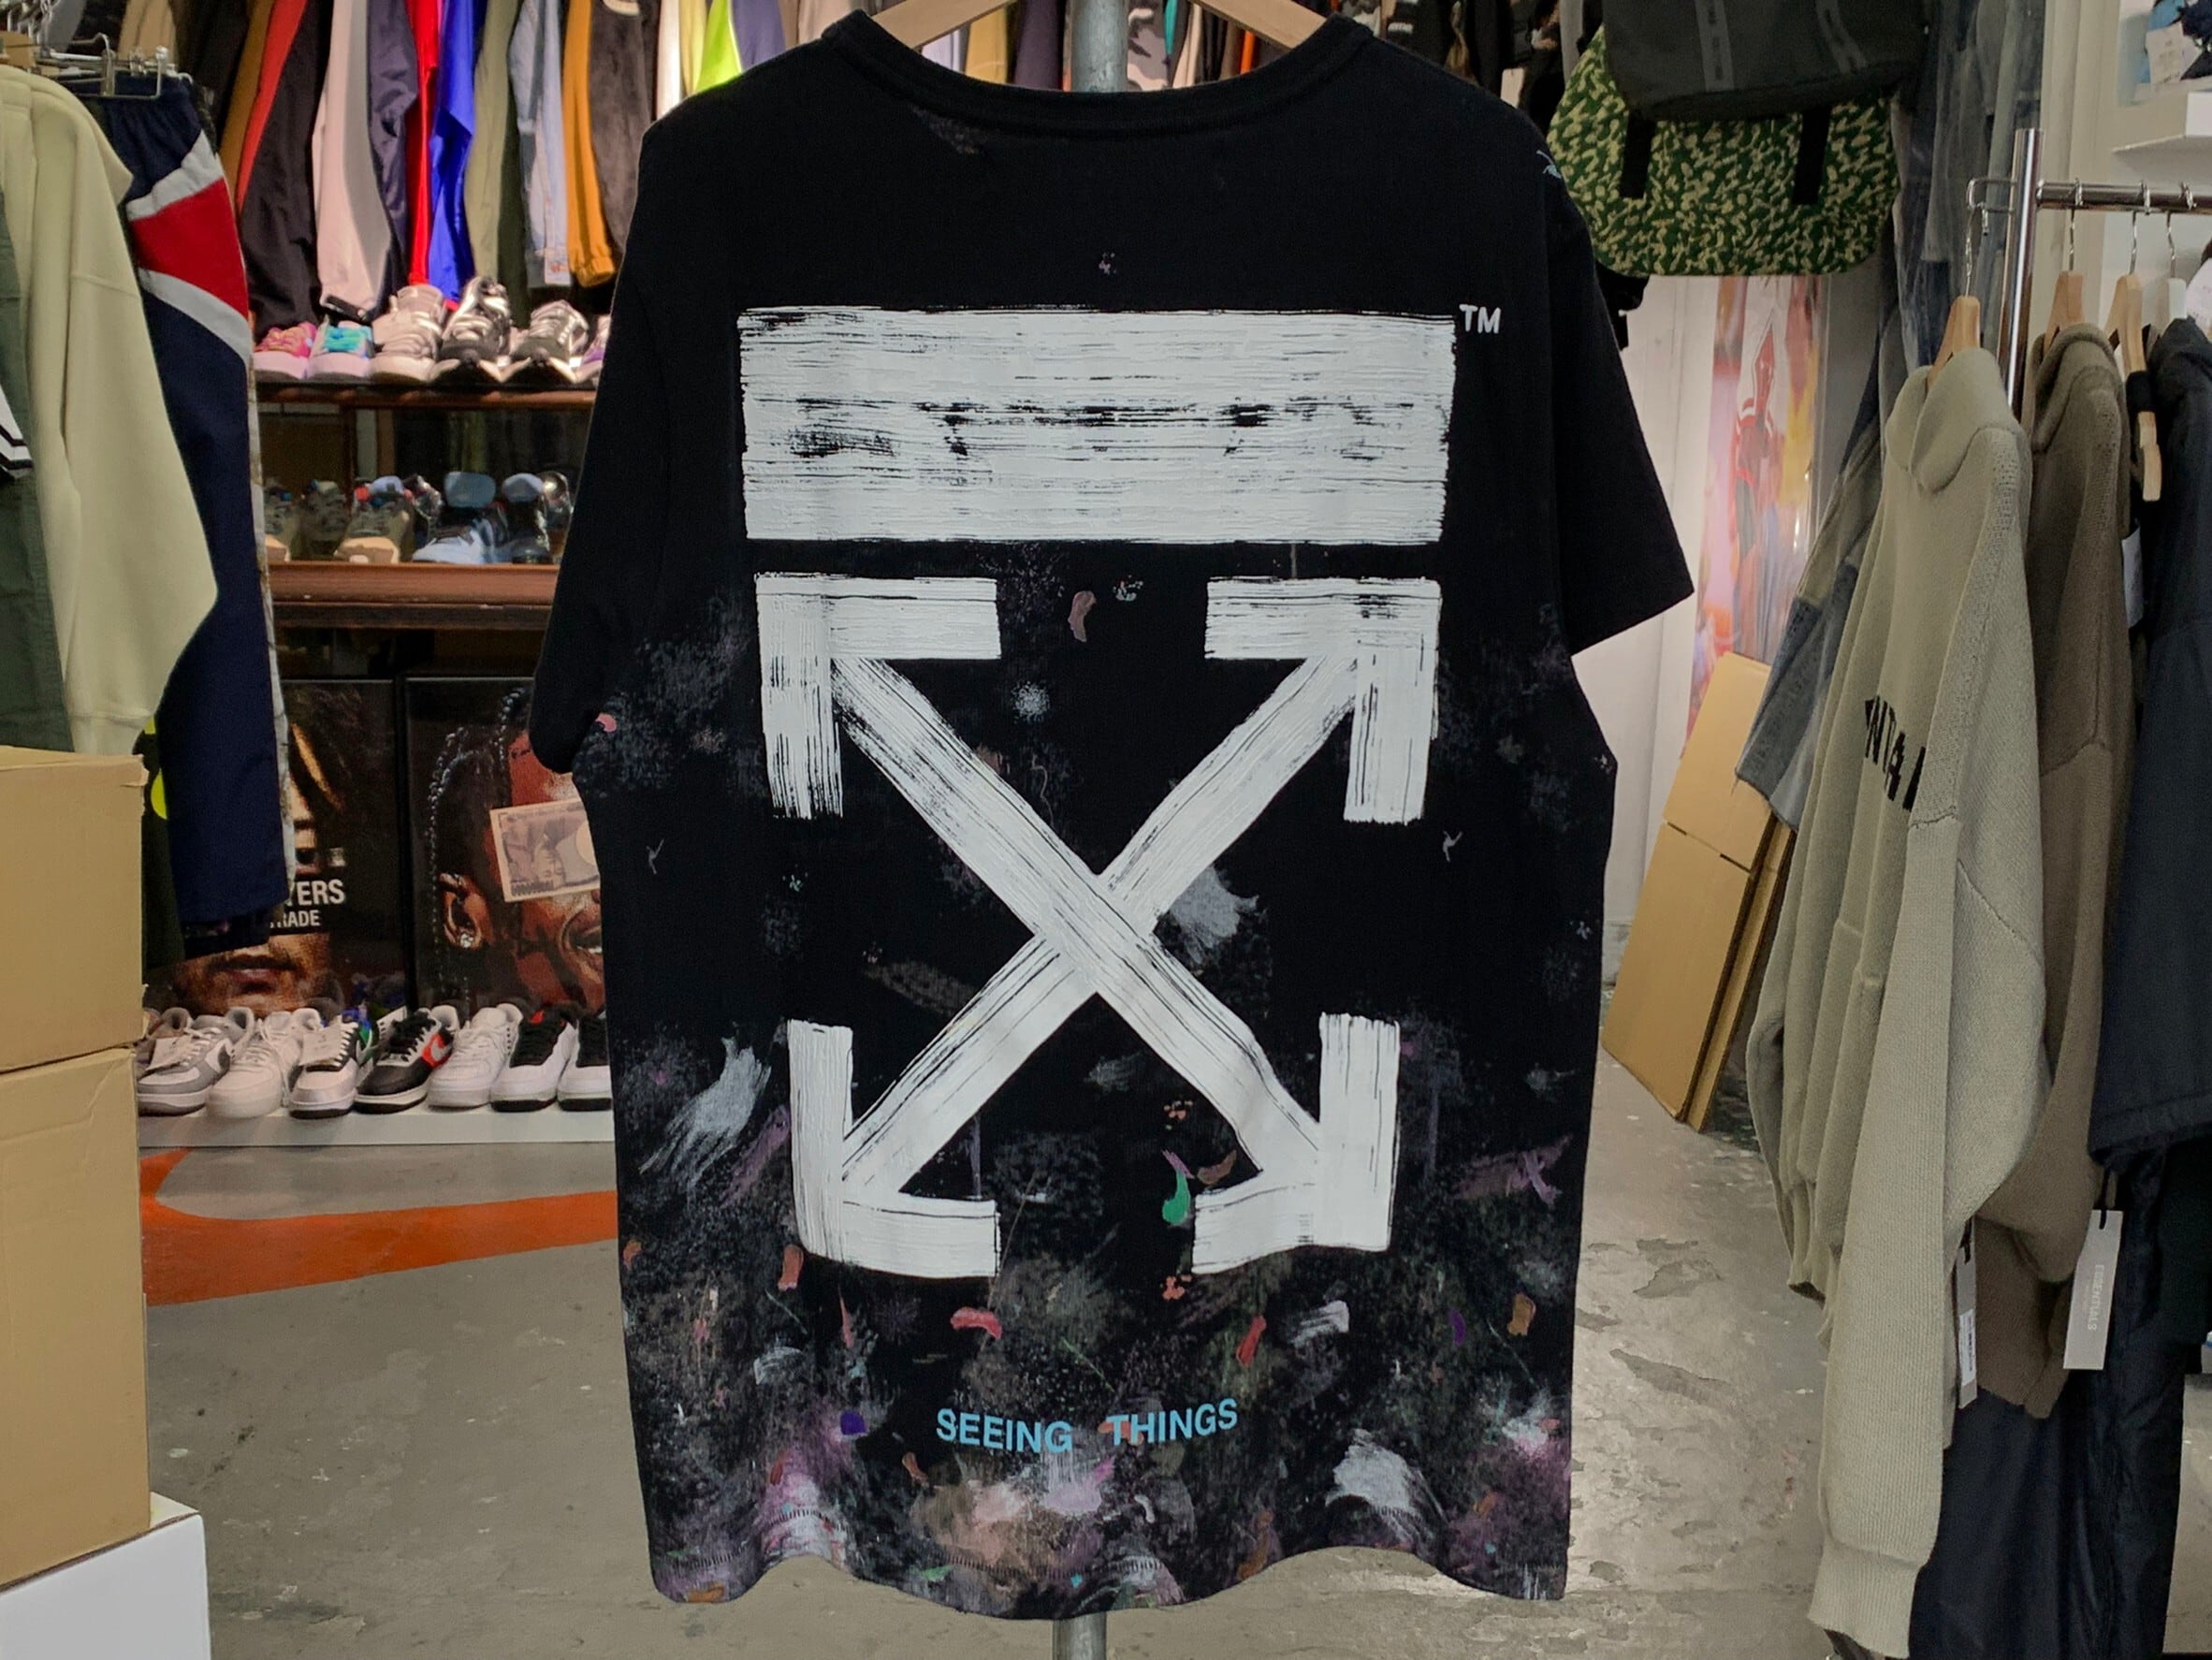 Tシャツ/カットソー(半袖/袖なし)OFF-WHITE Galaxy Brushed Tee